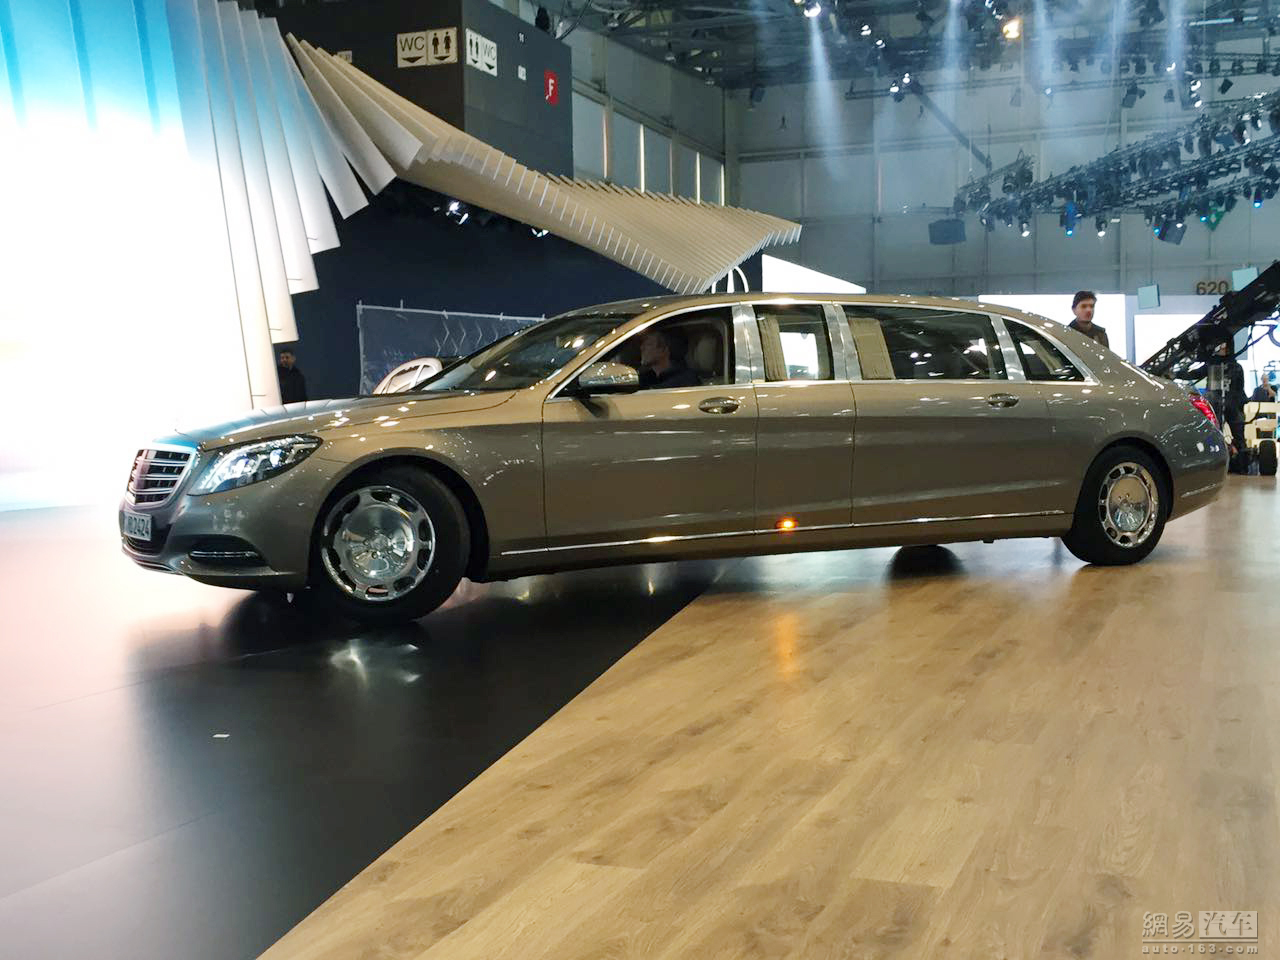 Mercedes Benz S600 Pullman Guard Price In India Tyla Tomlinson